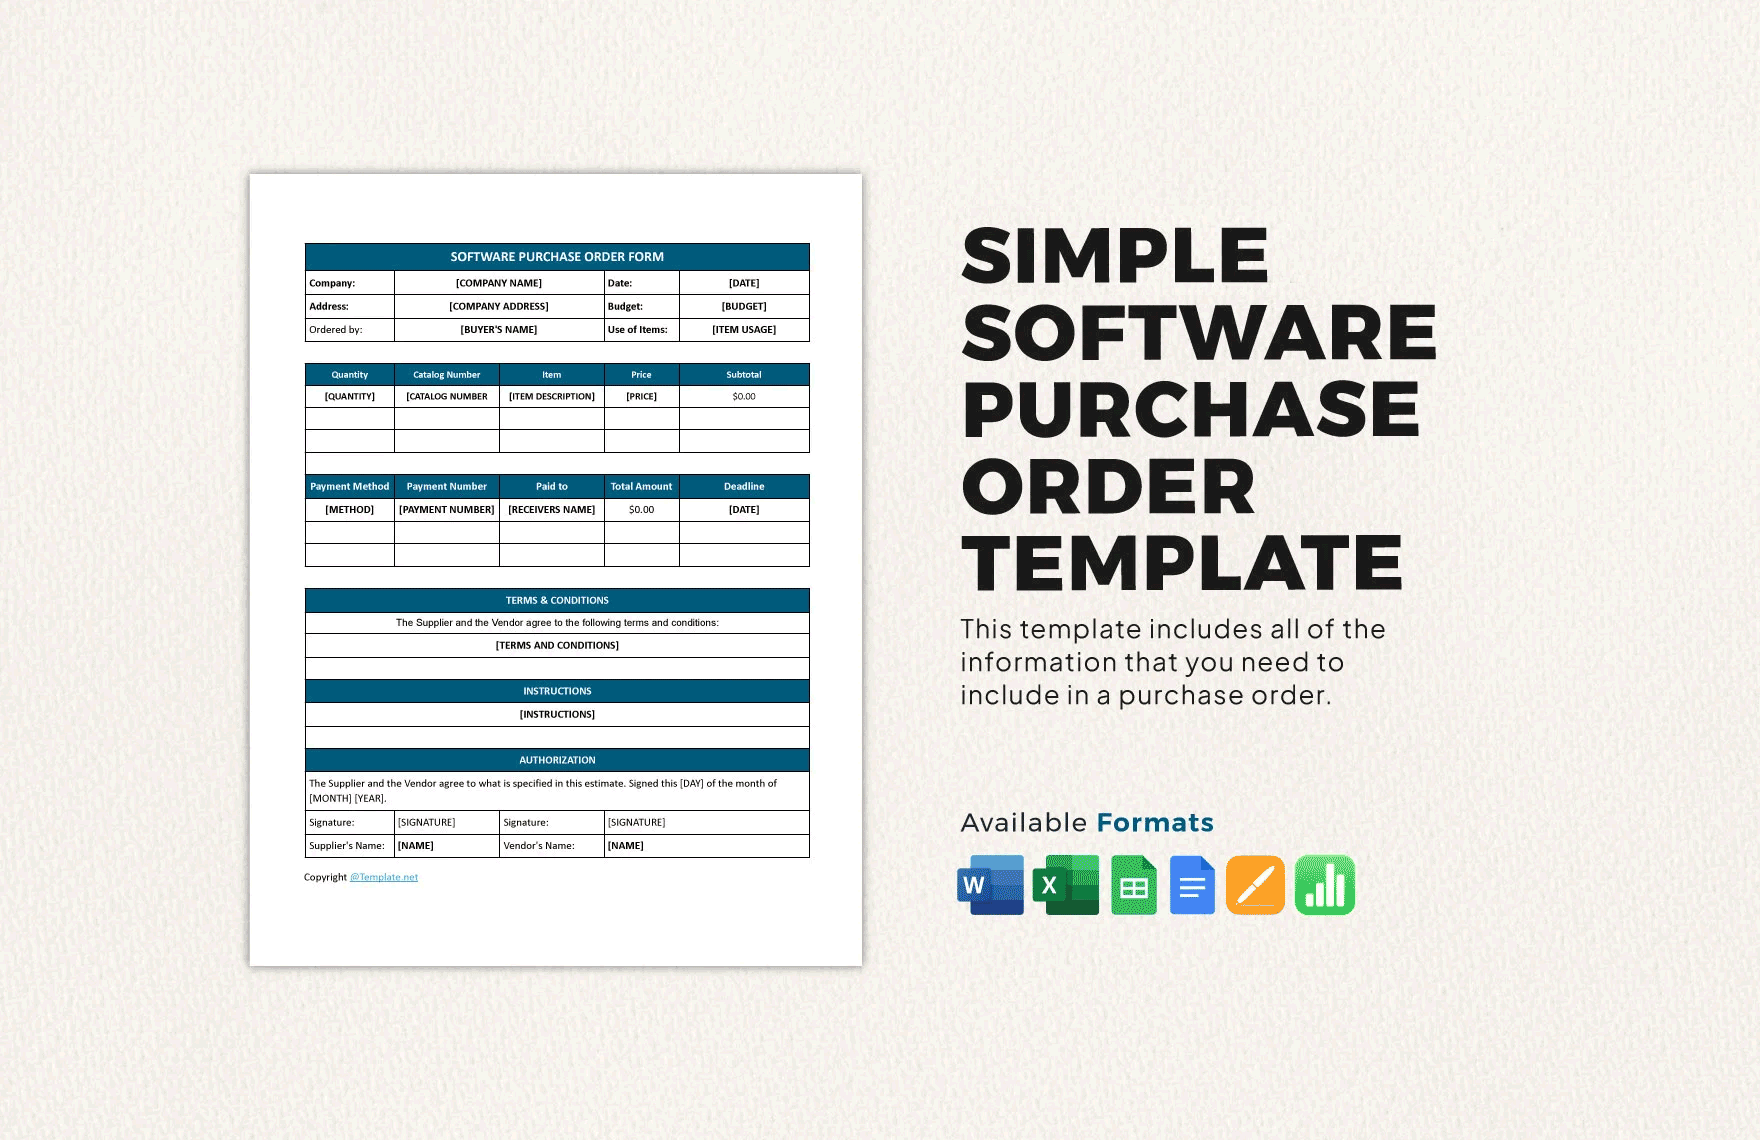 Simple Software Purchase Order Template